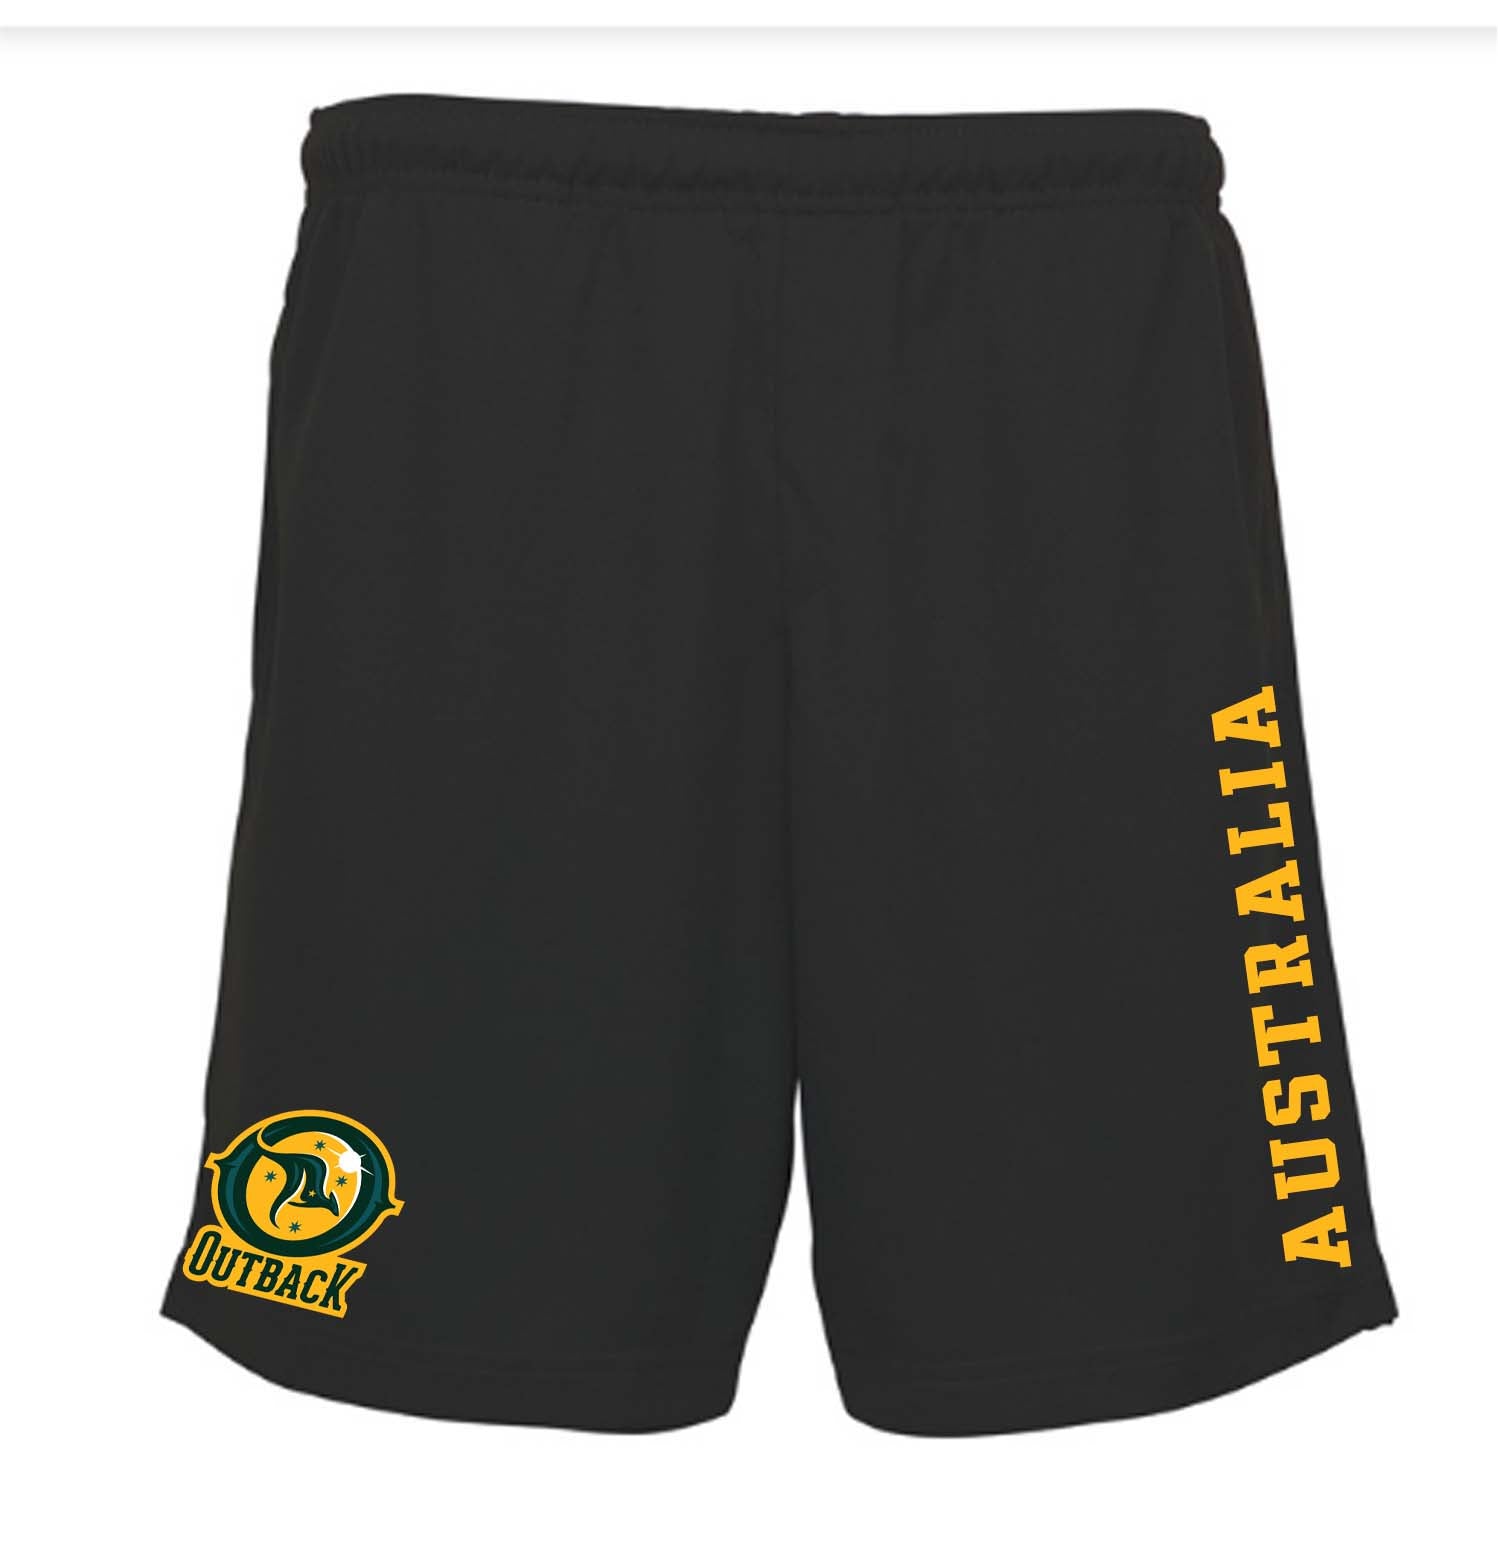 Outback BASKETBALL STYLE SHORTS WITH POCKETS